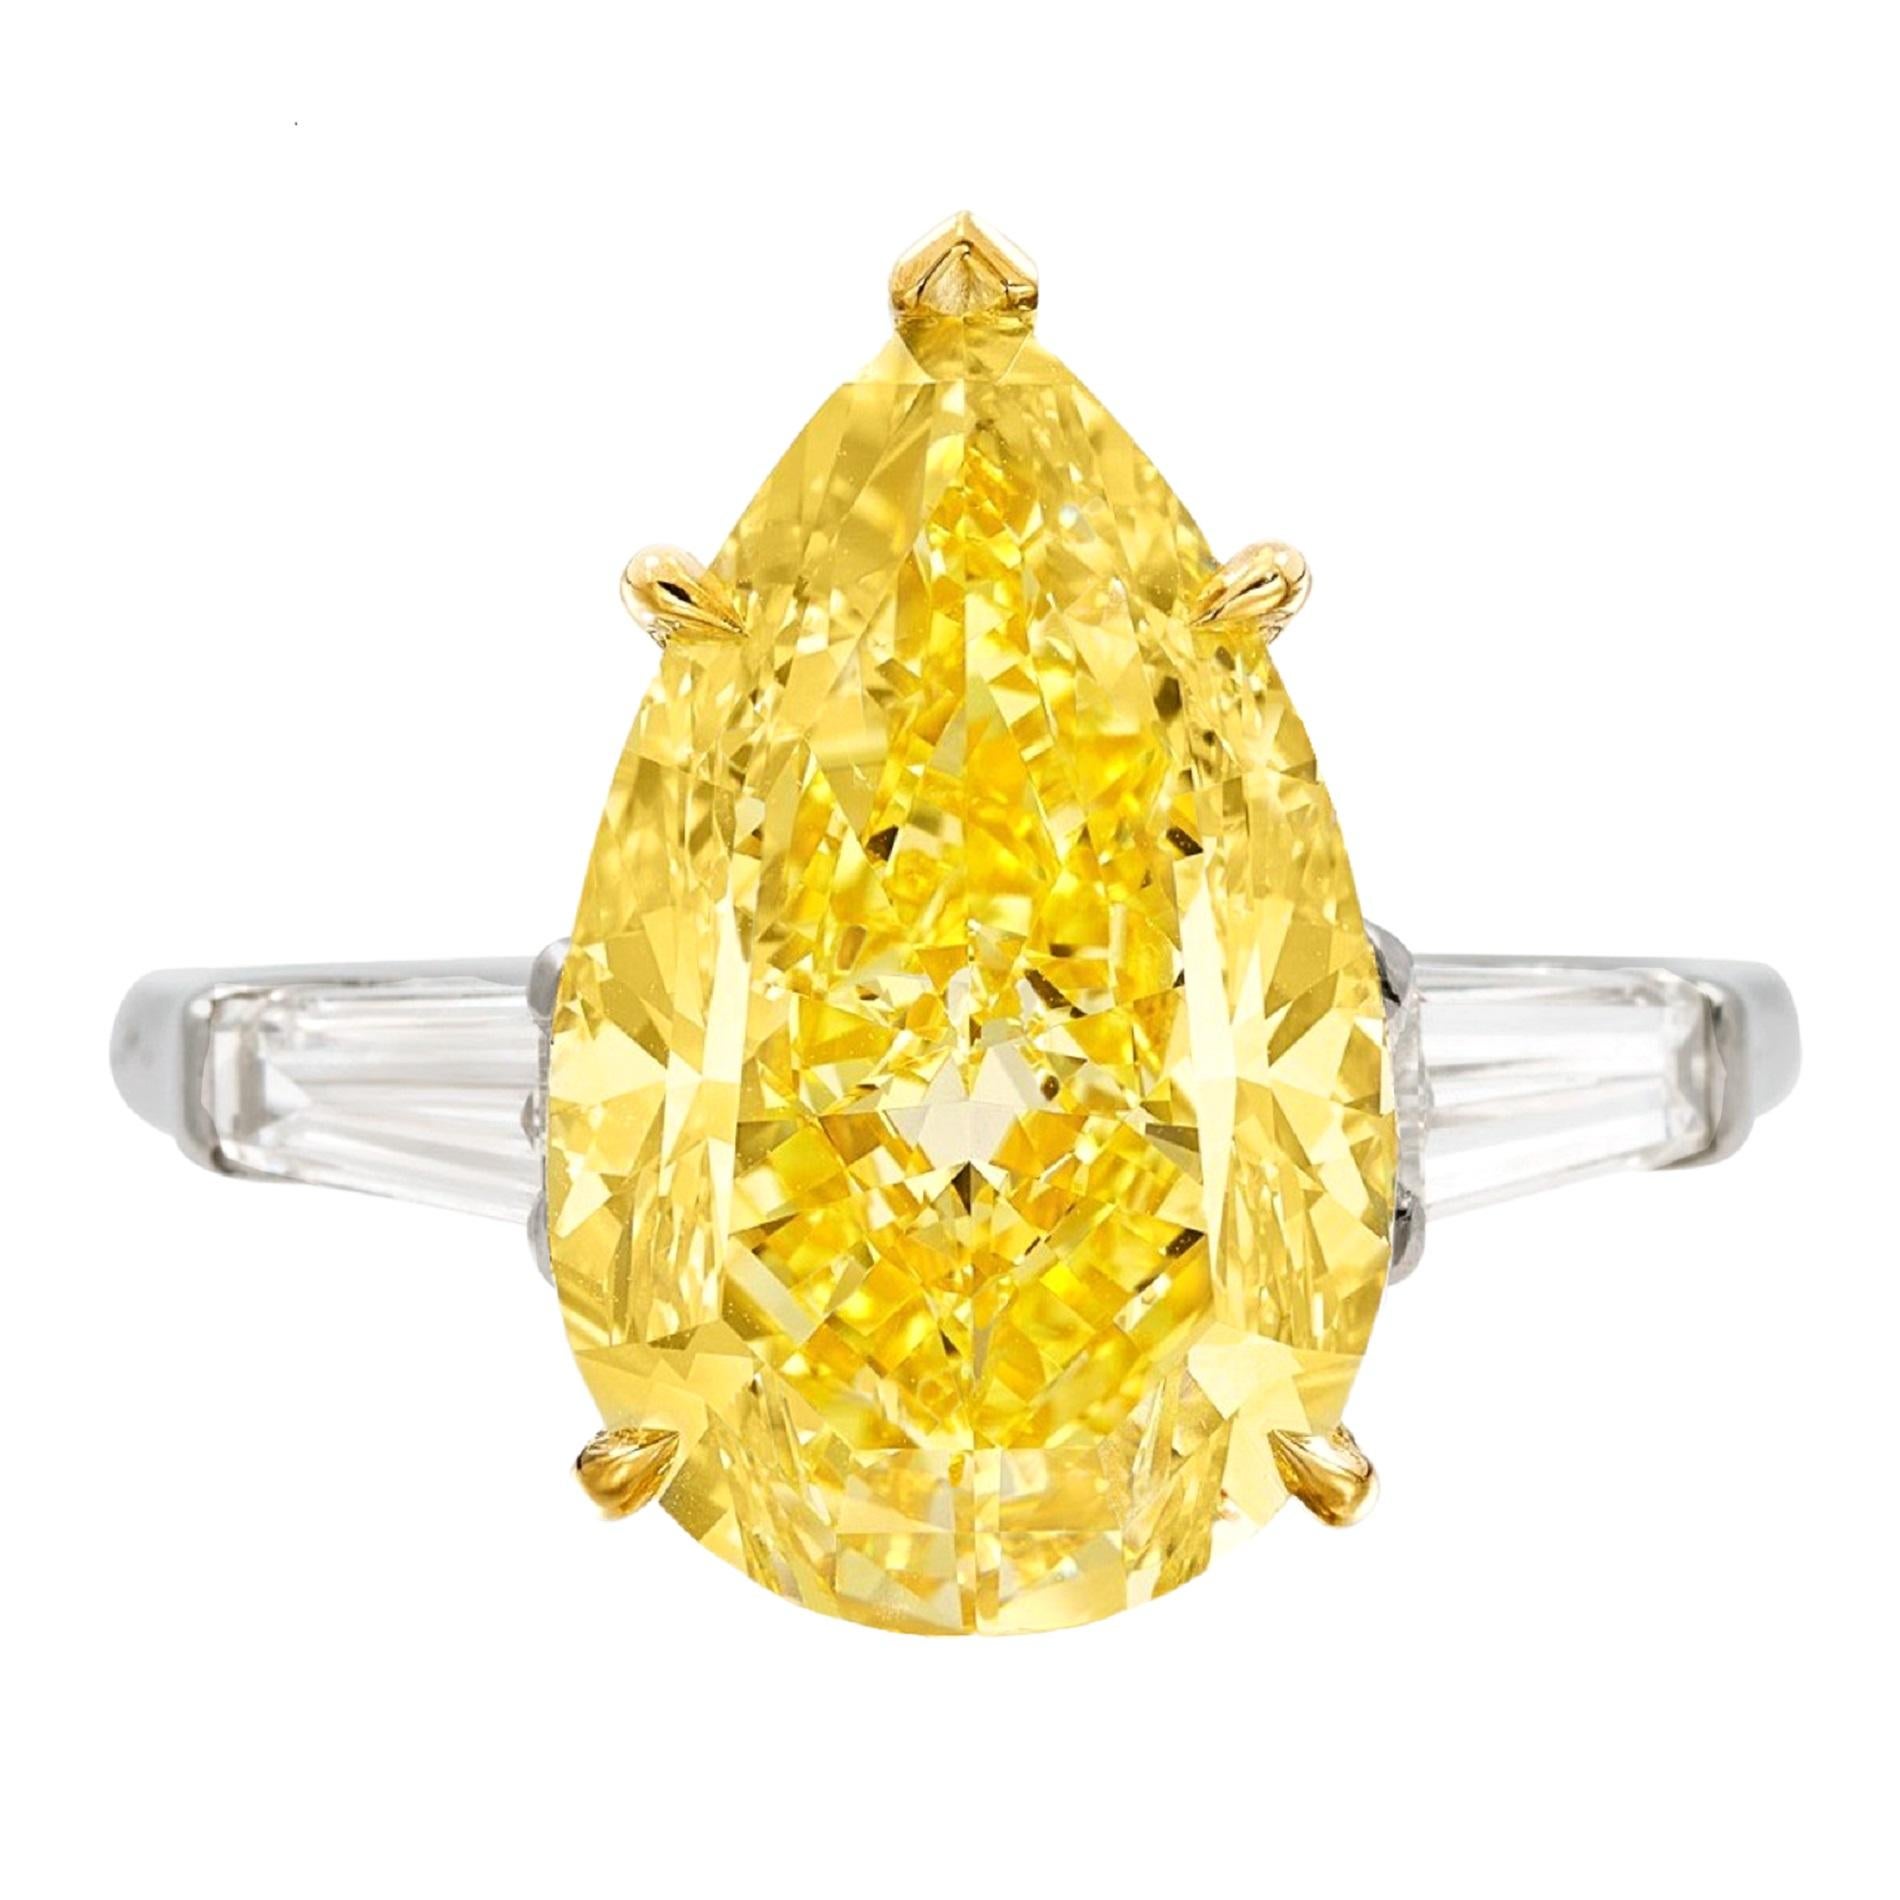 Pear Cut GIA Certified 8.25 Carat Fancy Intense Yellow Diamond Solitaire Ring For Sale